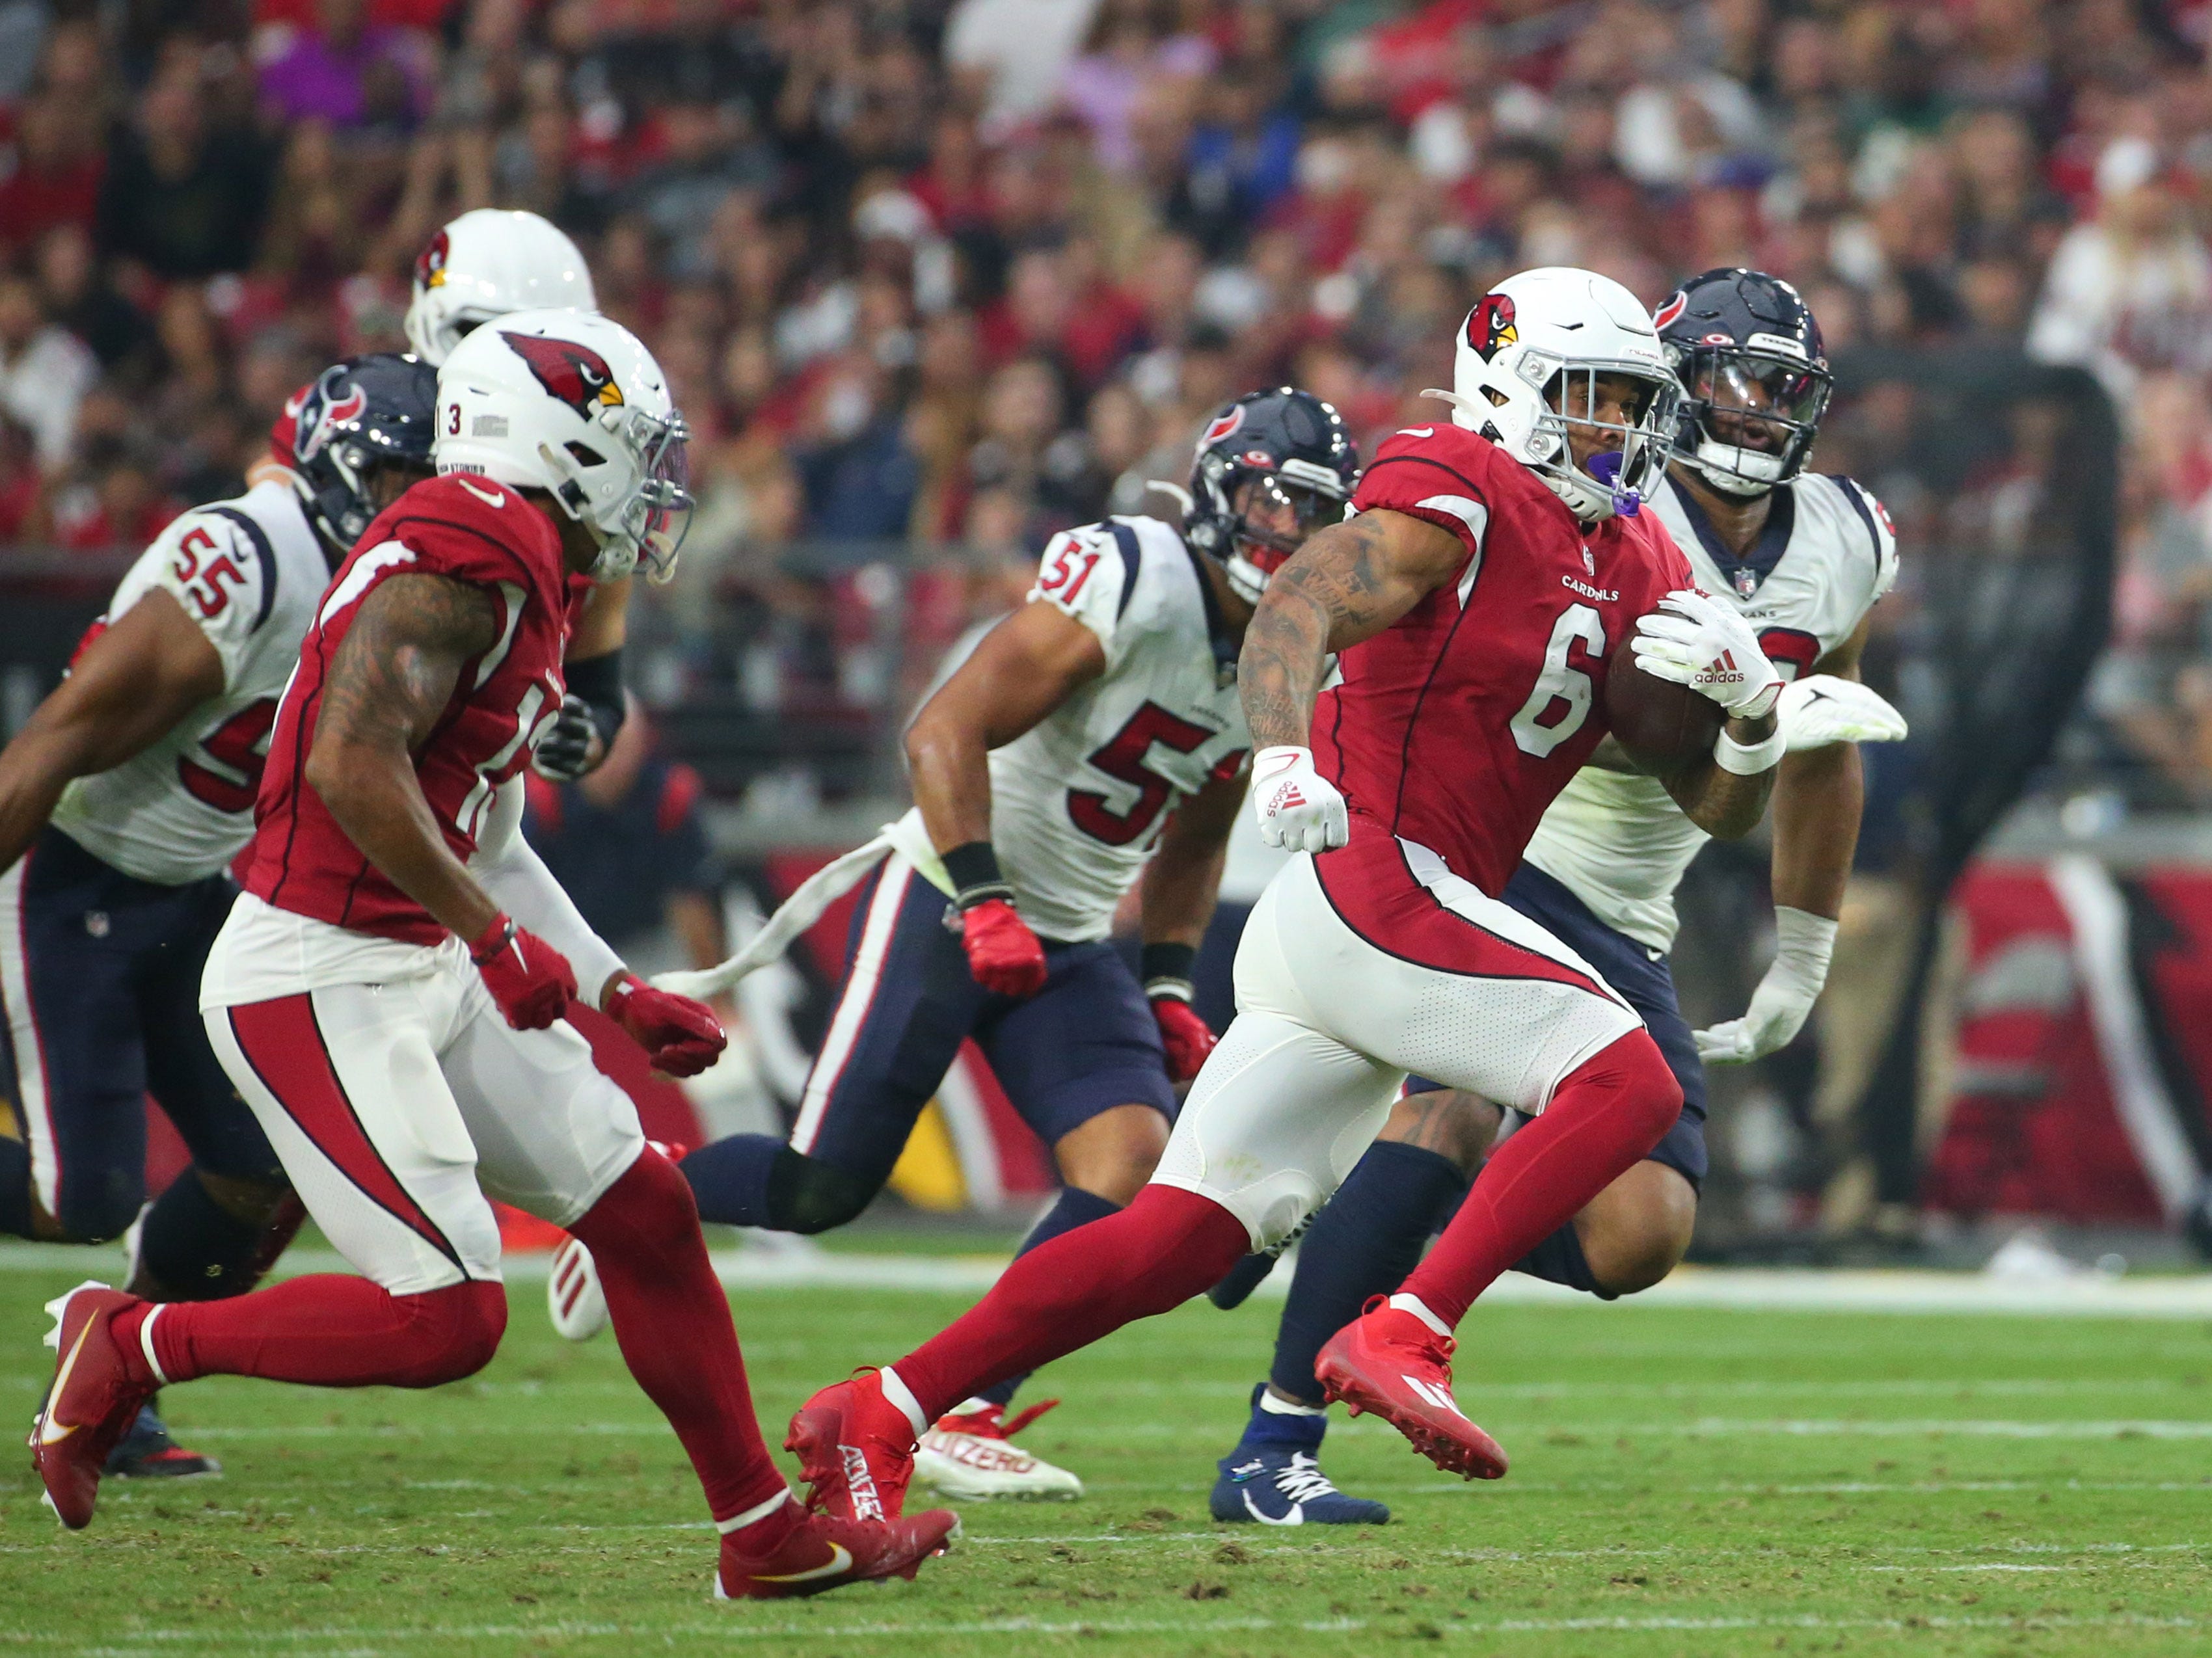 Arizona Cardinals running back James Conner (6) runs against the Houston Texans during the second quarter in Glendale, Ariz. Oct. 24, 2021. Cardinals Vs Texans